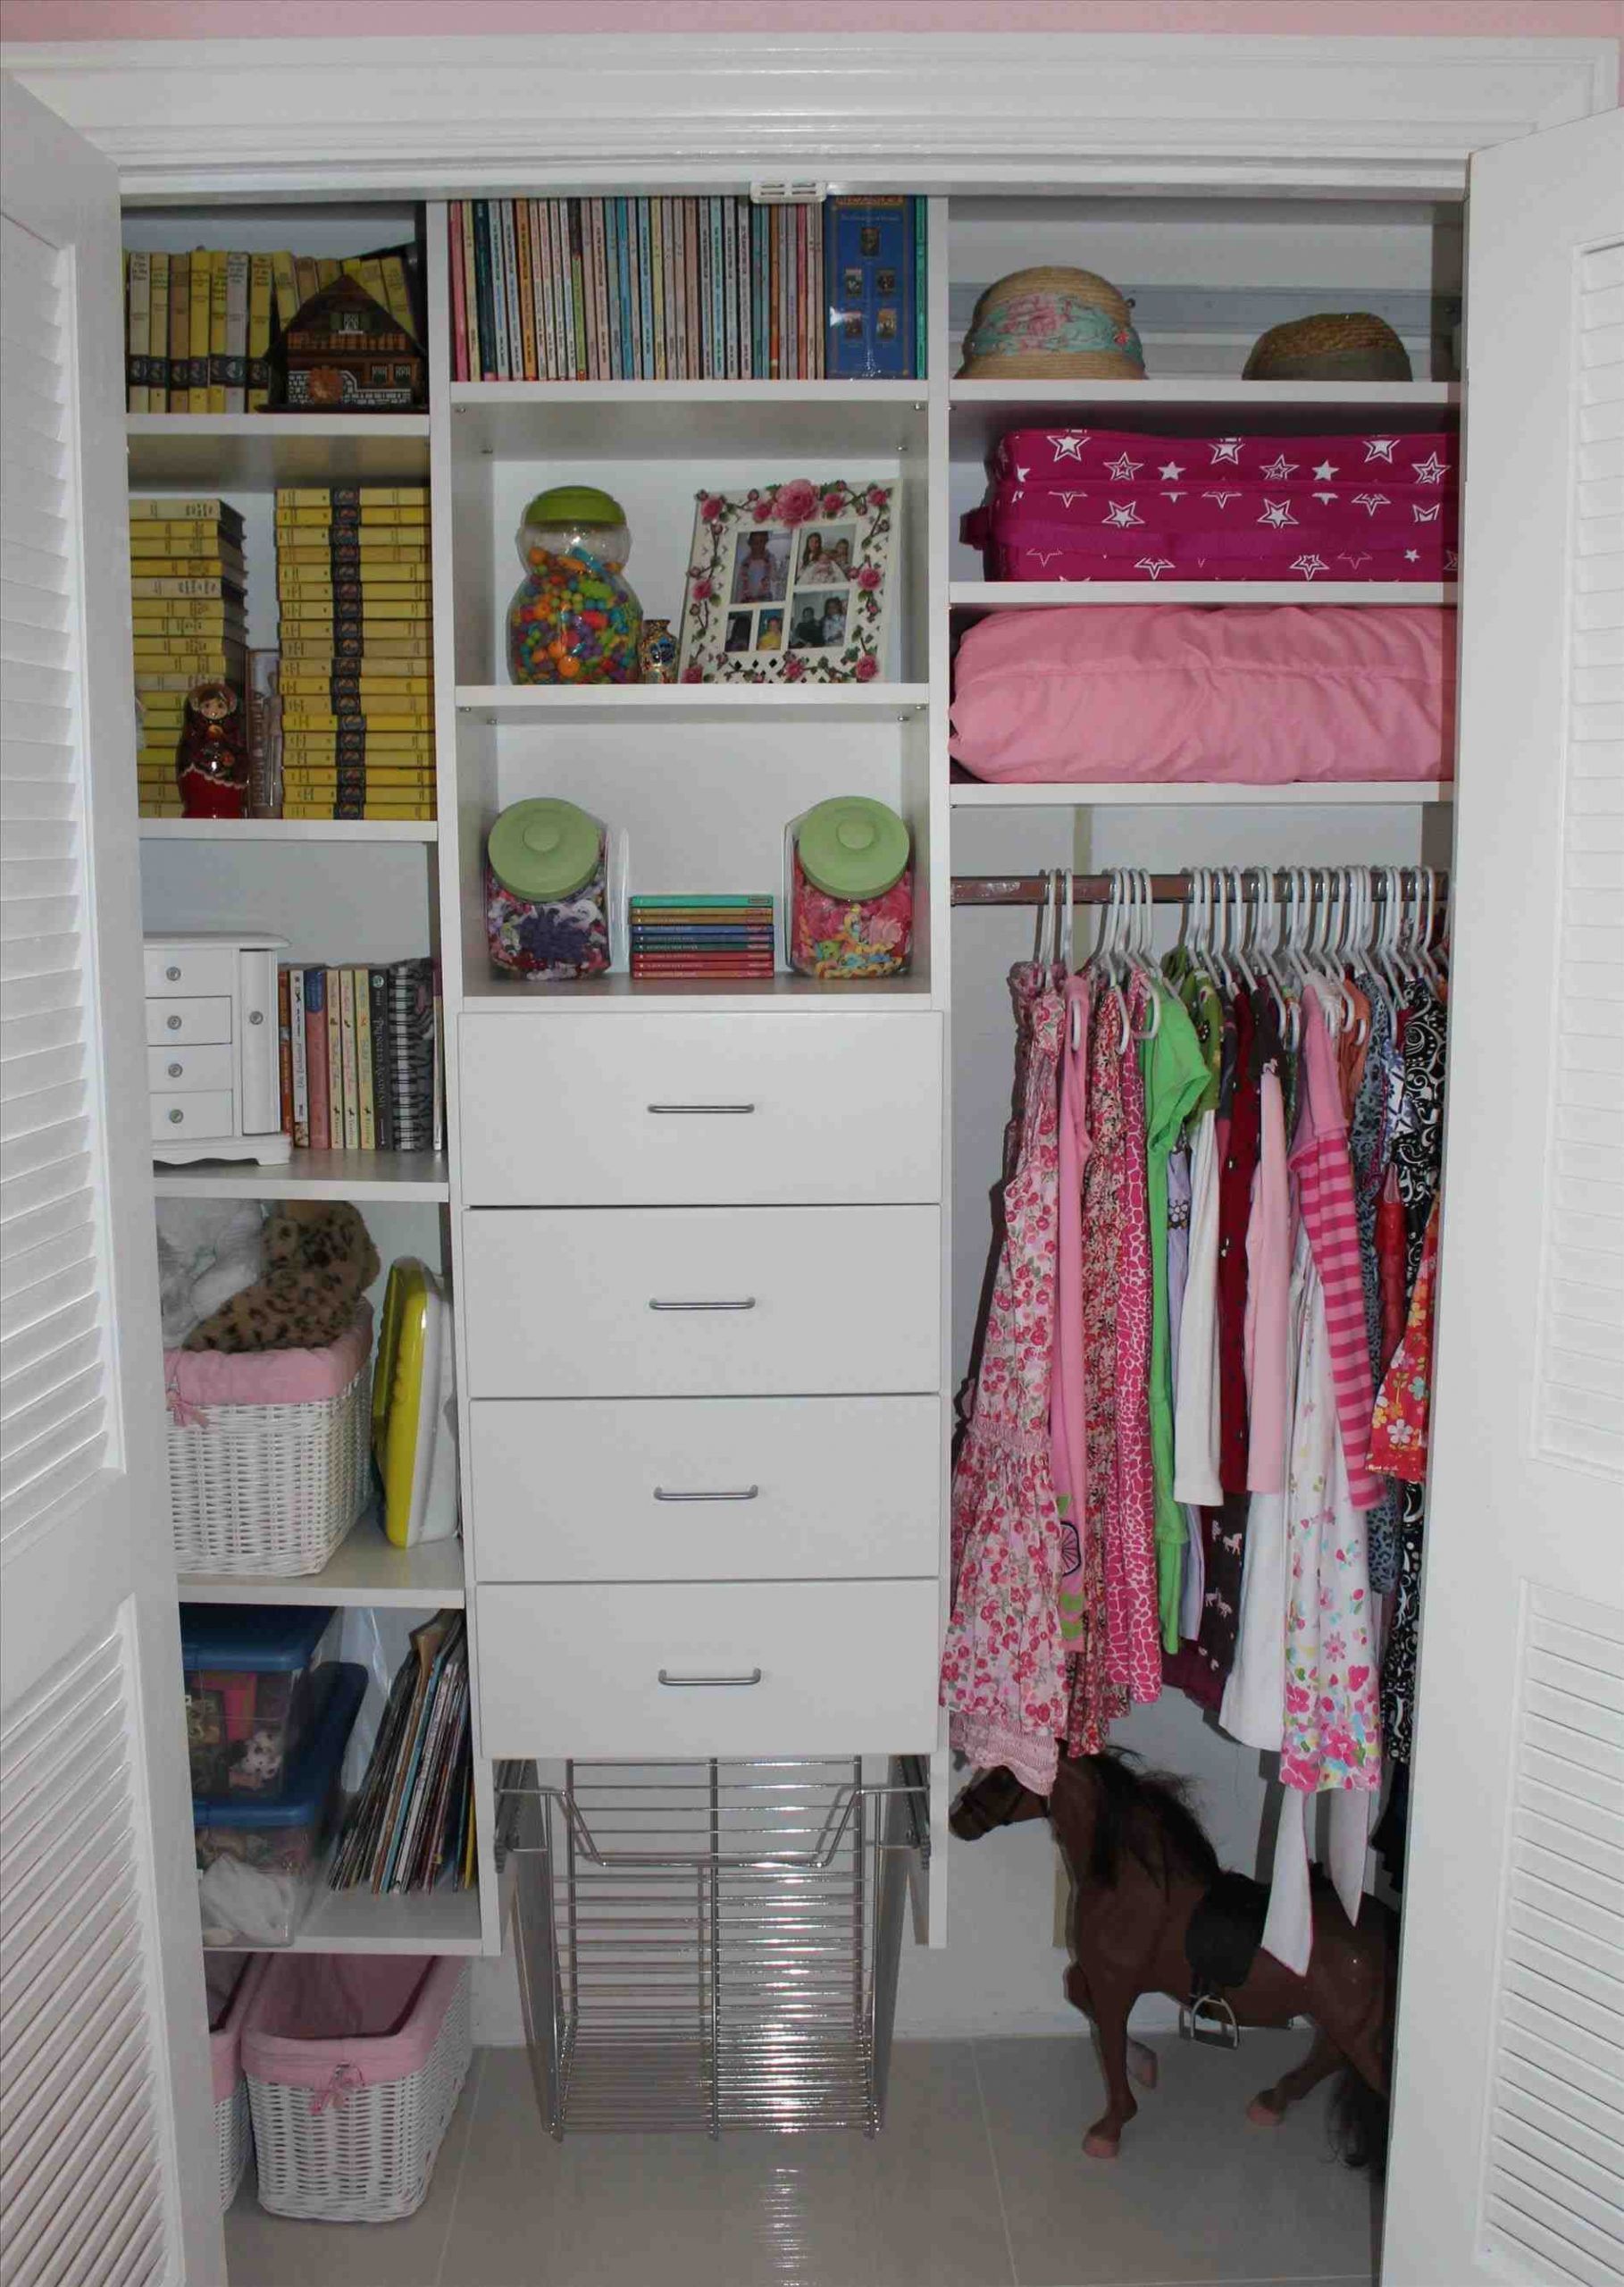 Clothes Storage Ideas For Bedroom
 Diy Bedroom Clothing Storage ARCH DSGN